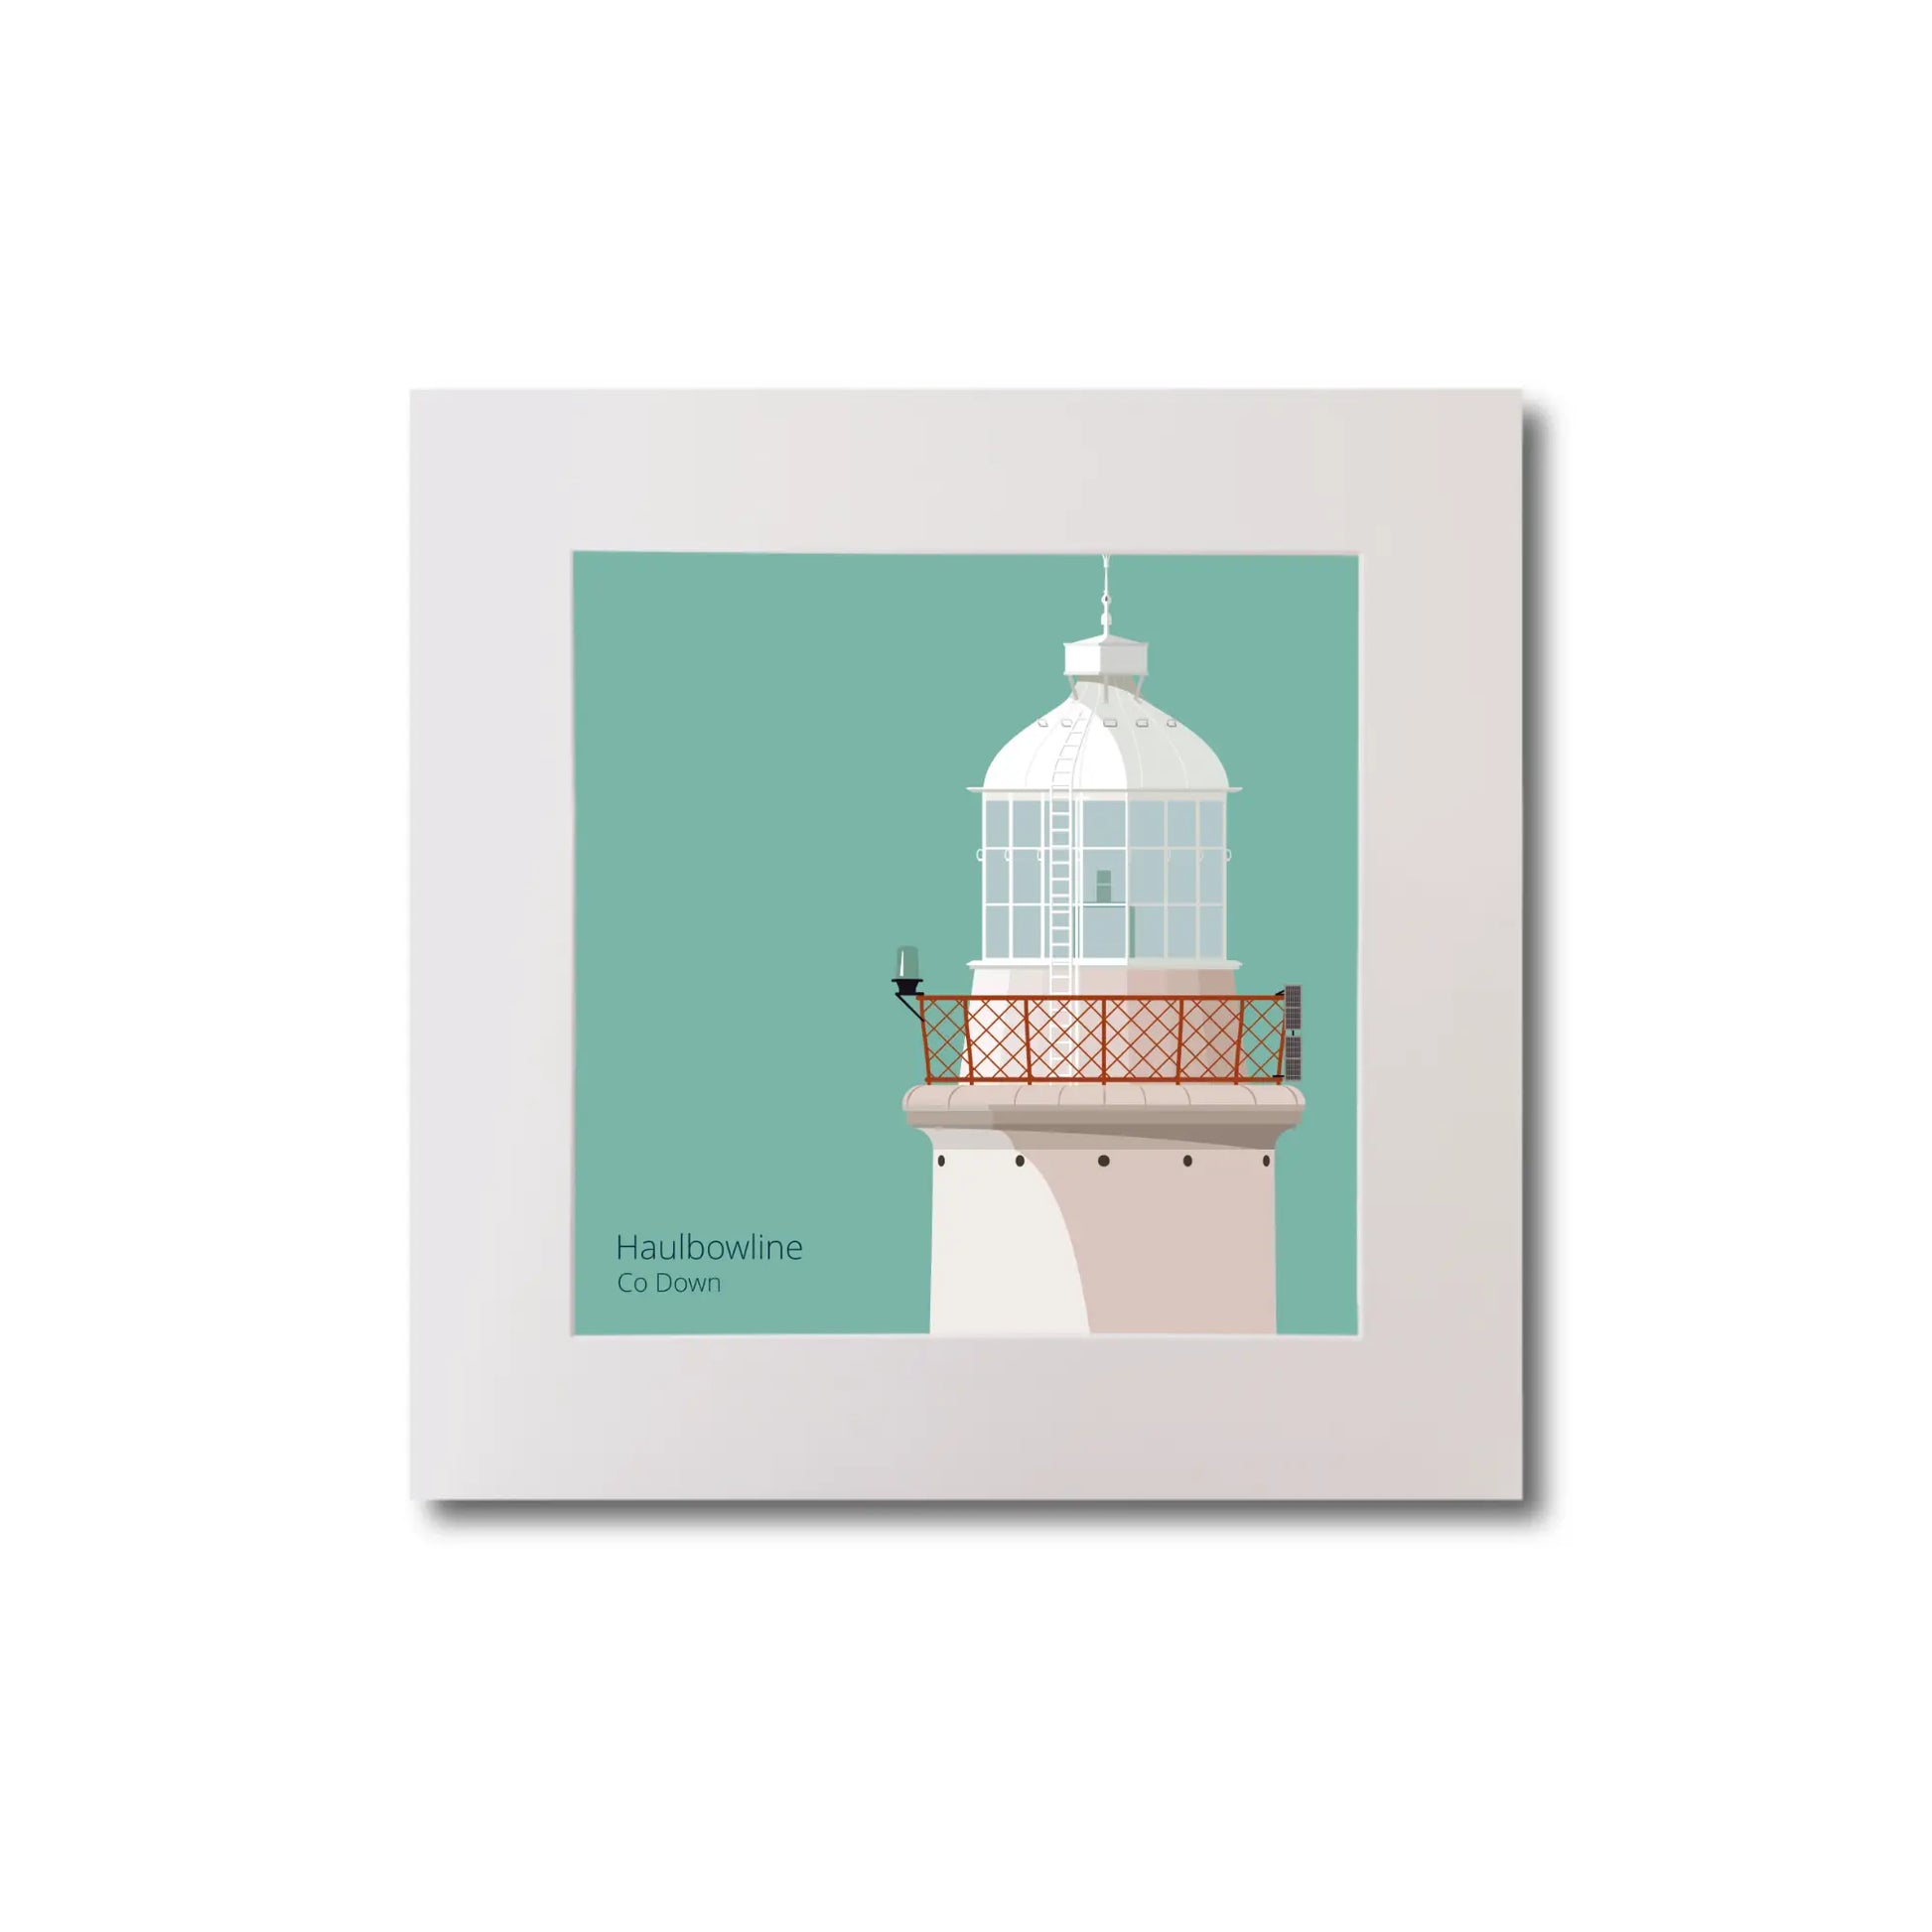 Illustration of Haulbowline lighthouse on an ocean green background, mounted and measuring 20x20cm.